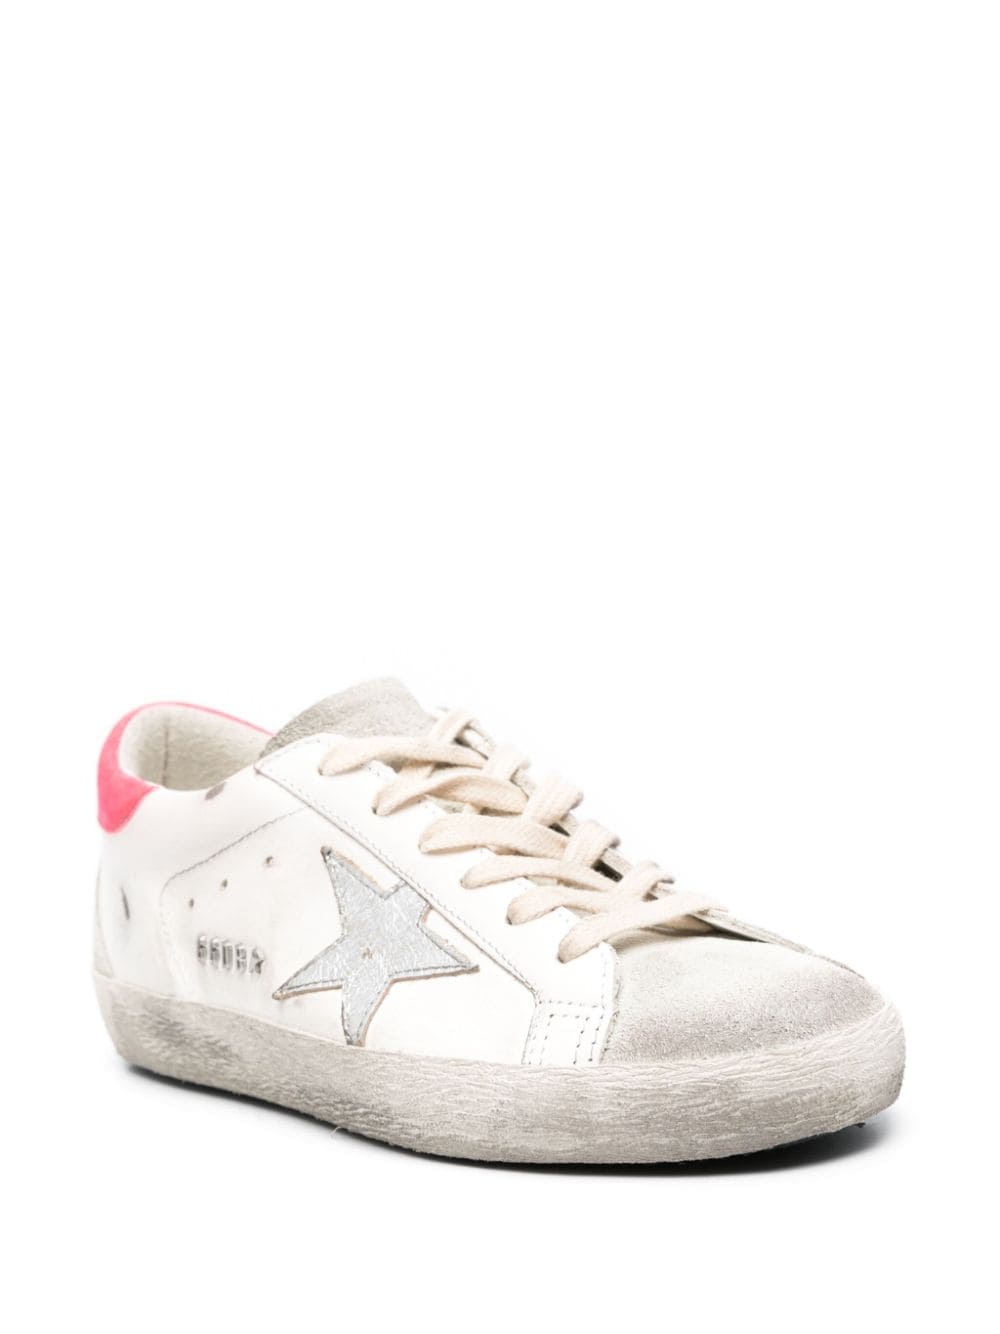 GOLDEN GOOSE Fluorescent White and Silver Sneakers for Women